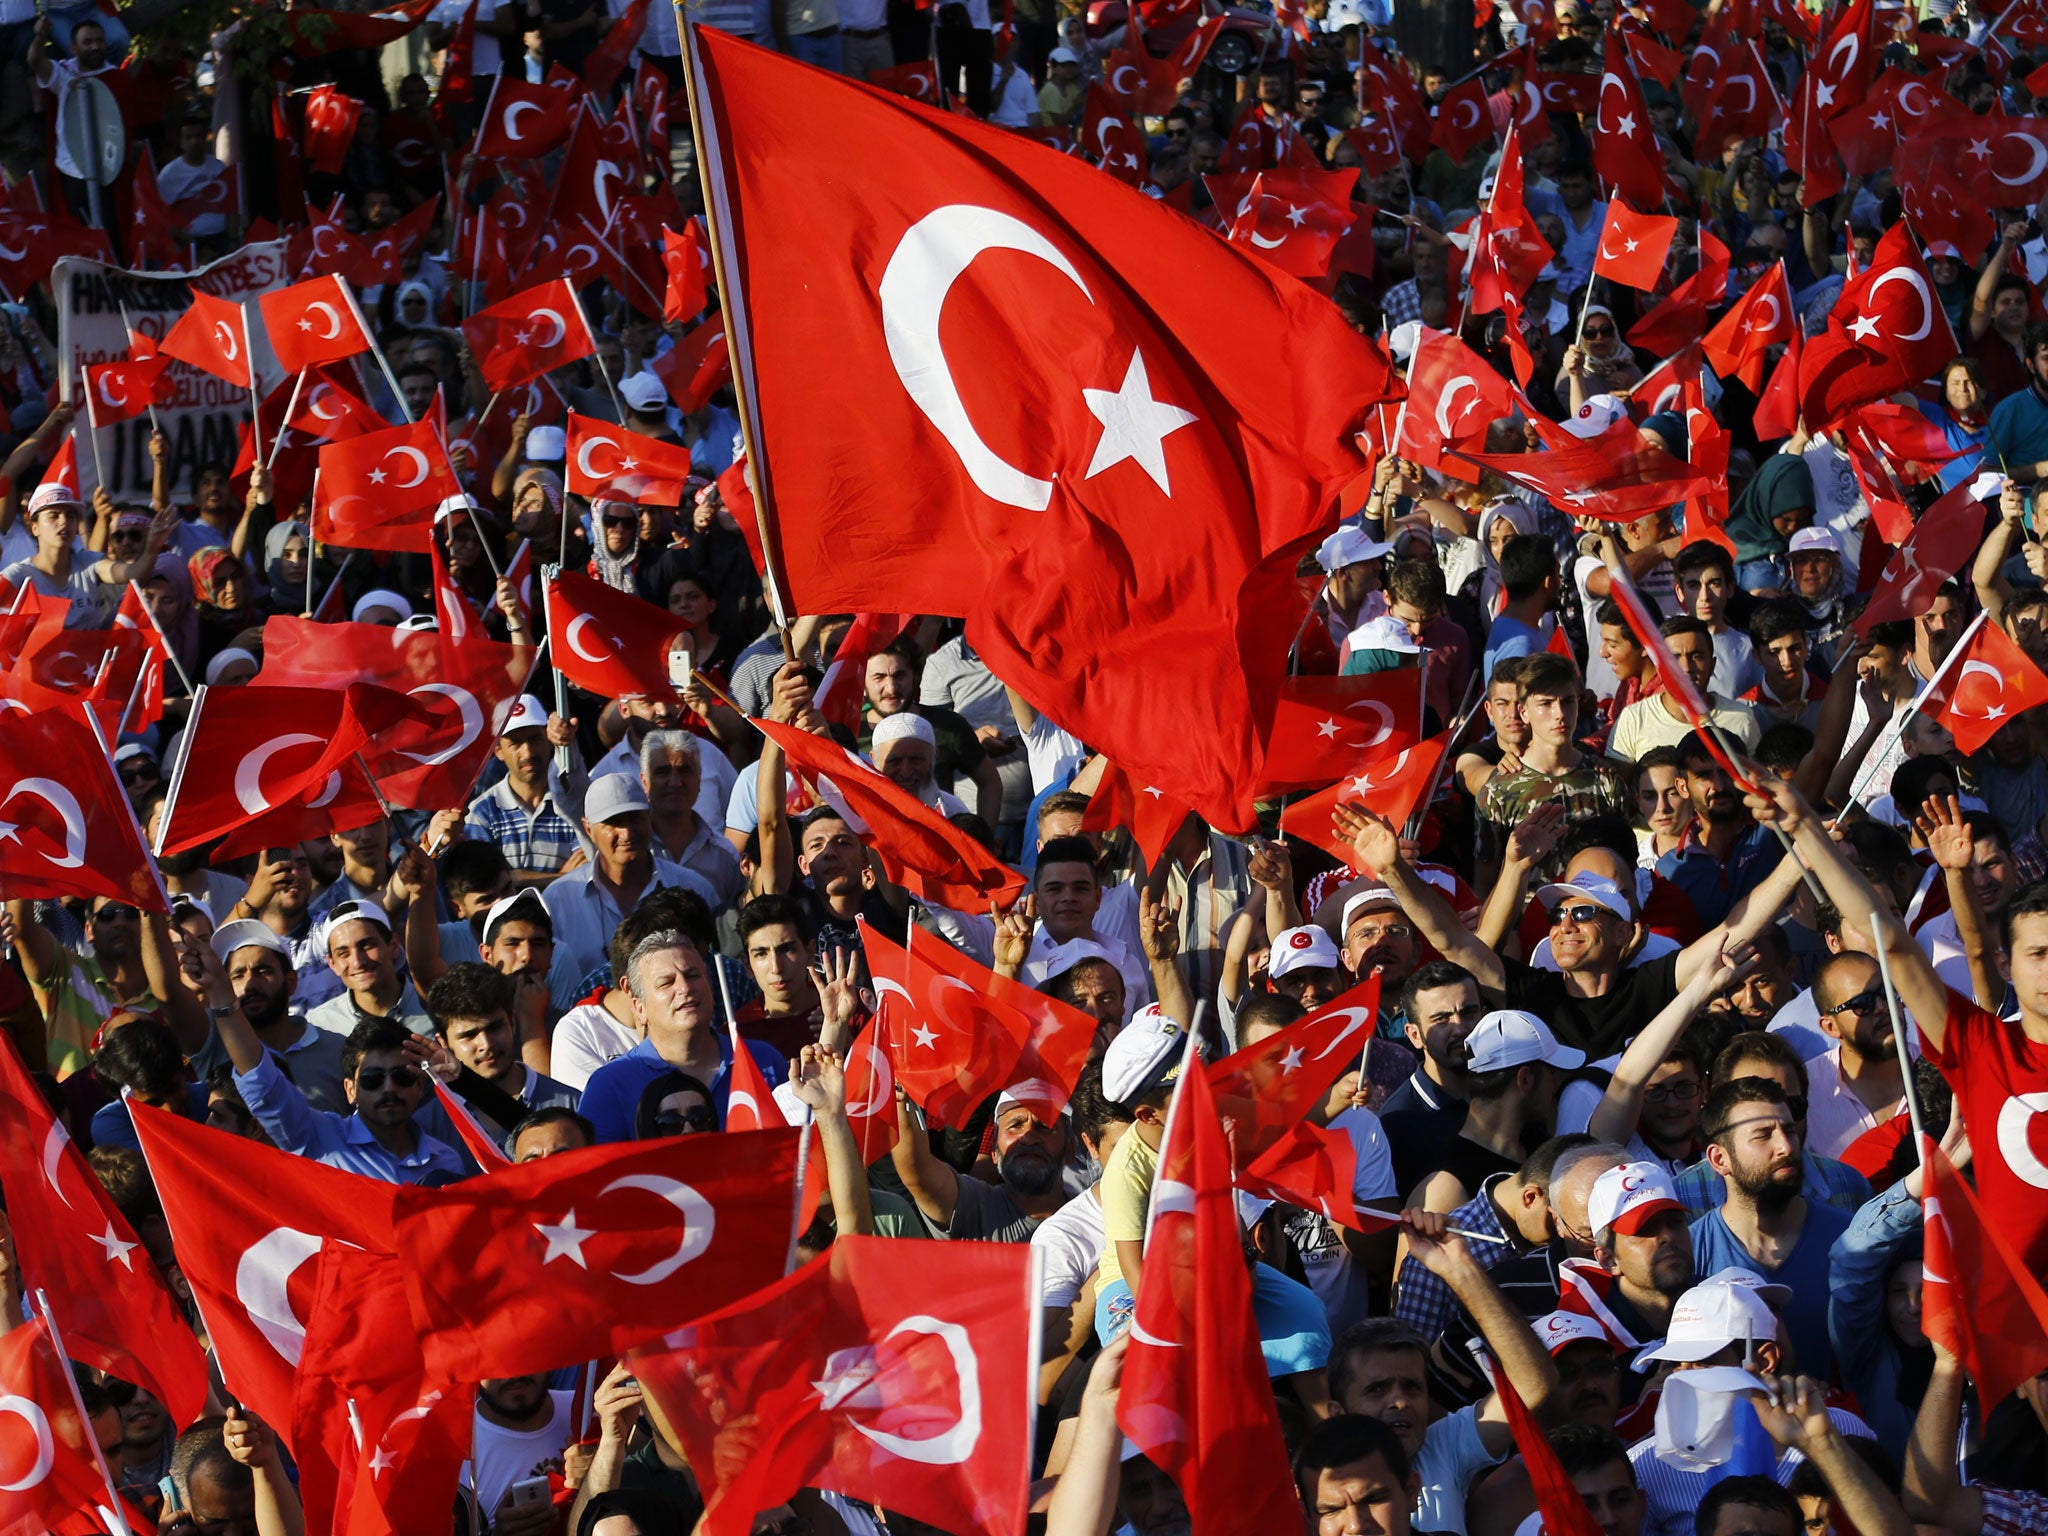 People wave flags as they wait for Turkish President Recep Tayyip Erdogan to appear for a speech in Istanbul on 16 July